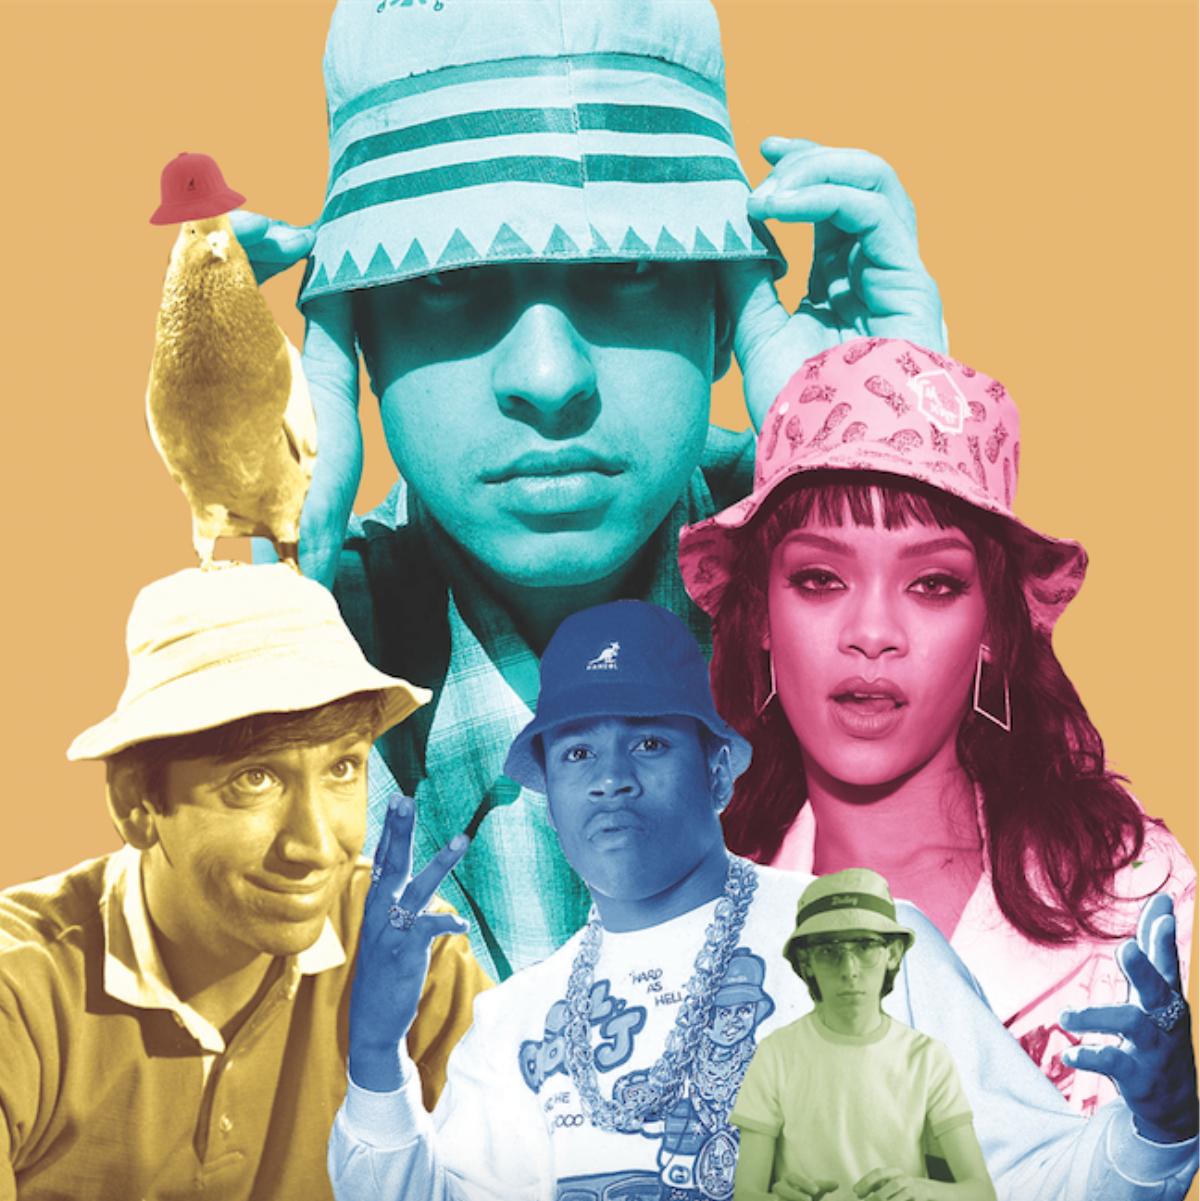 Bucket hats: what's the appeal?, Rihanna